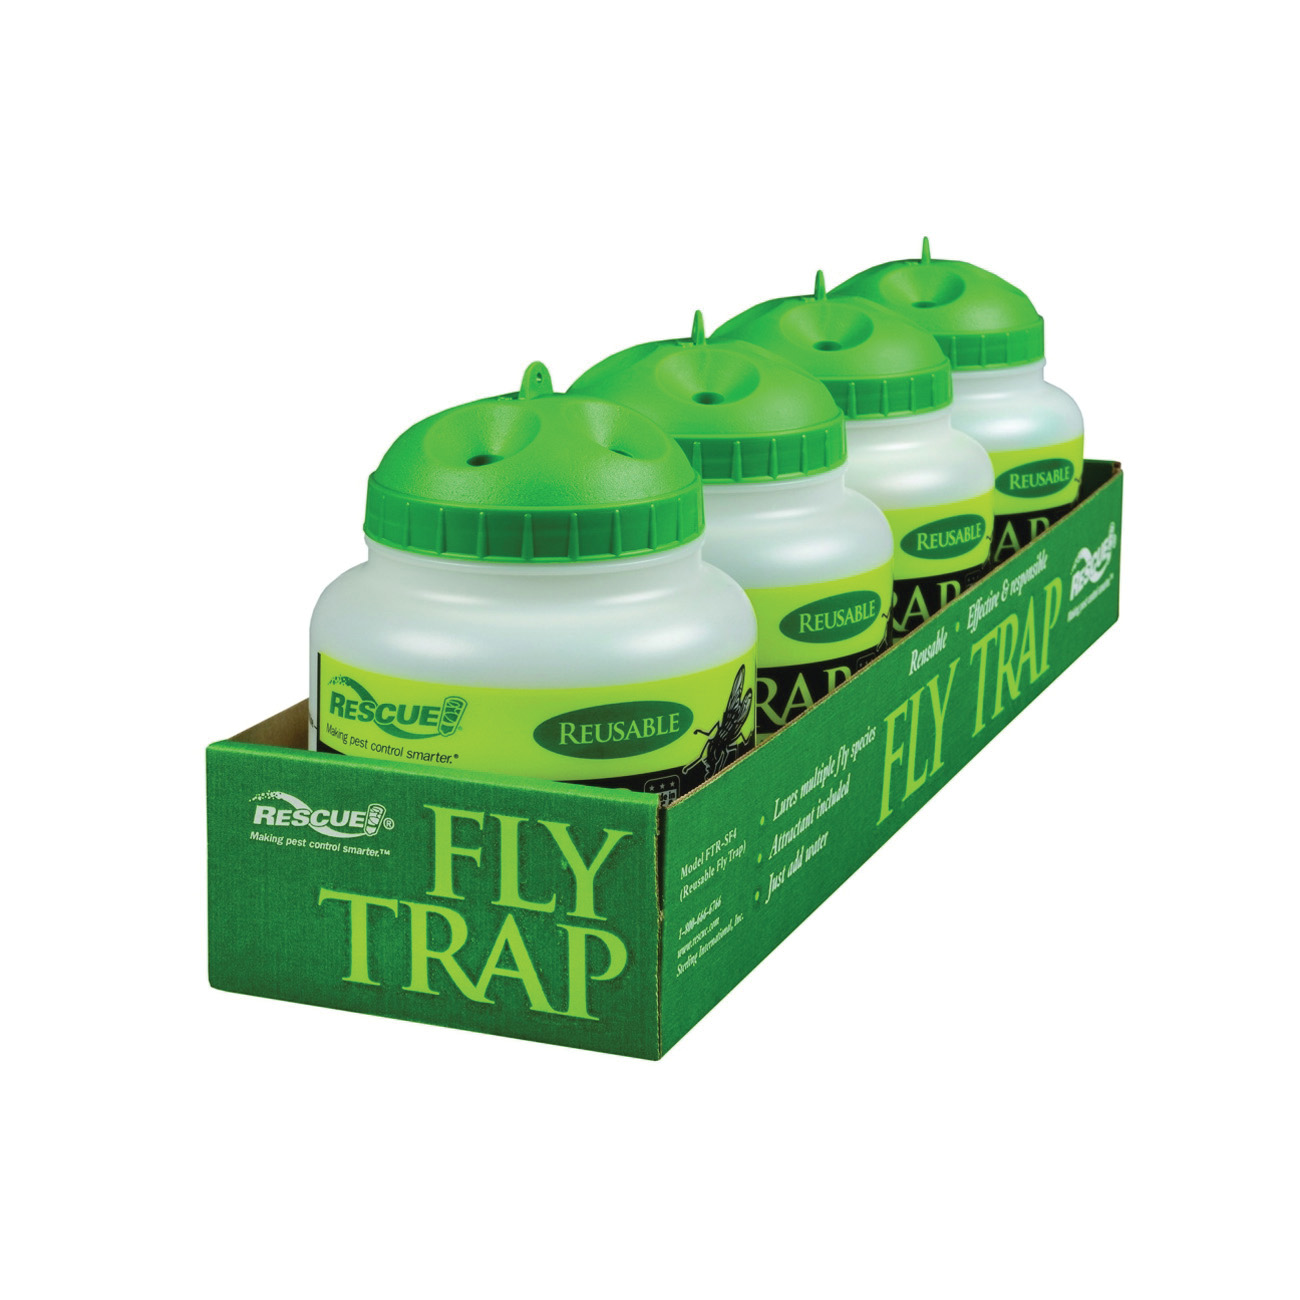 RESCUE FTR-SF4 Fly Trap Refill, Solid, Musty Refill Pack - 2